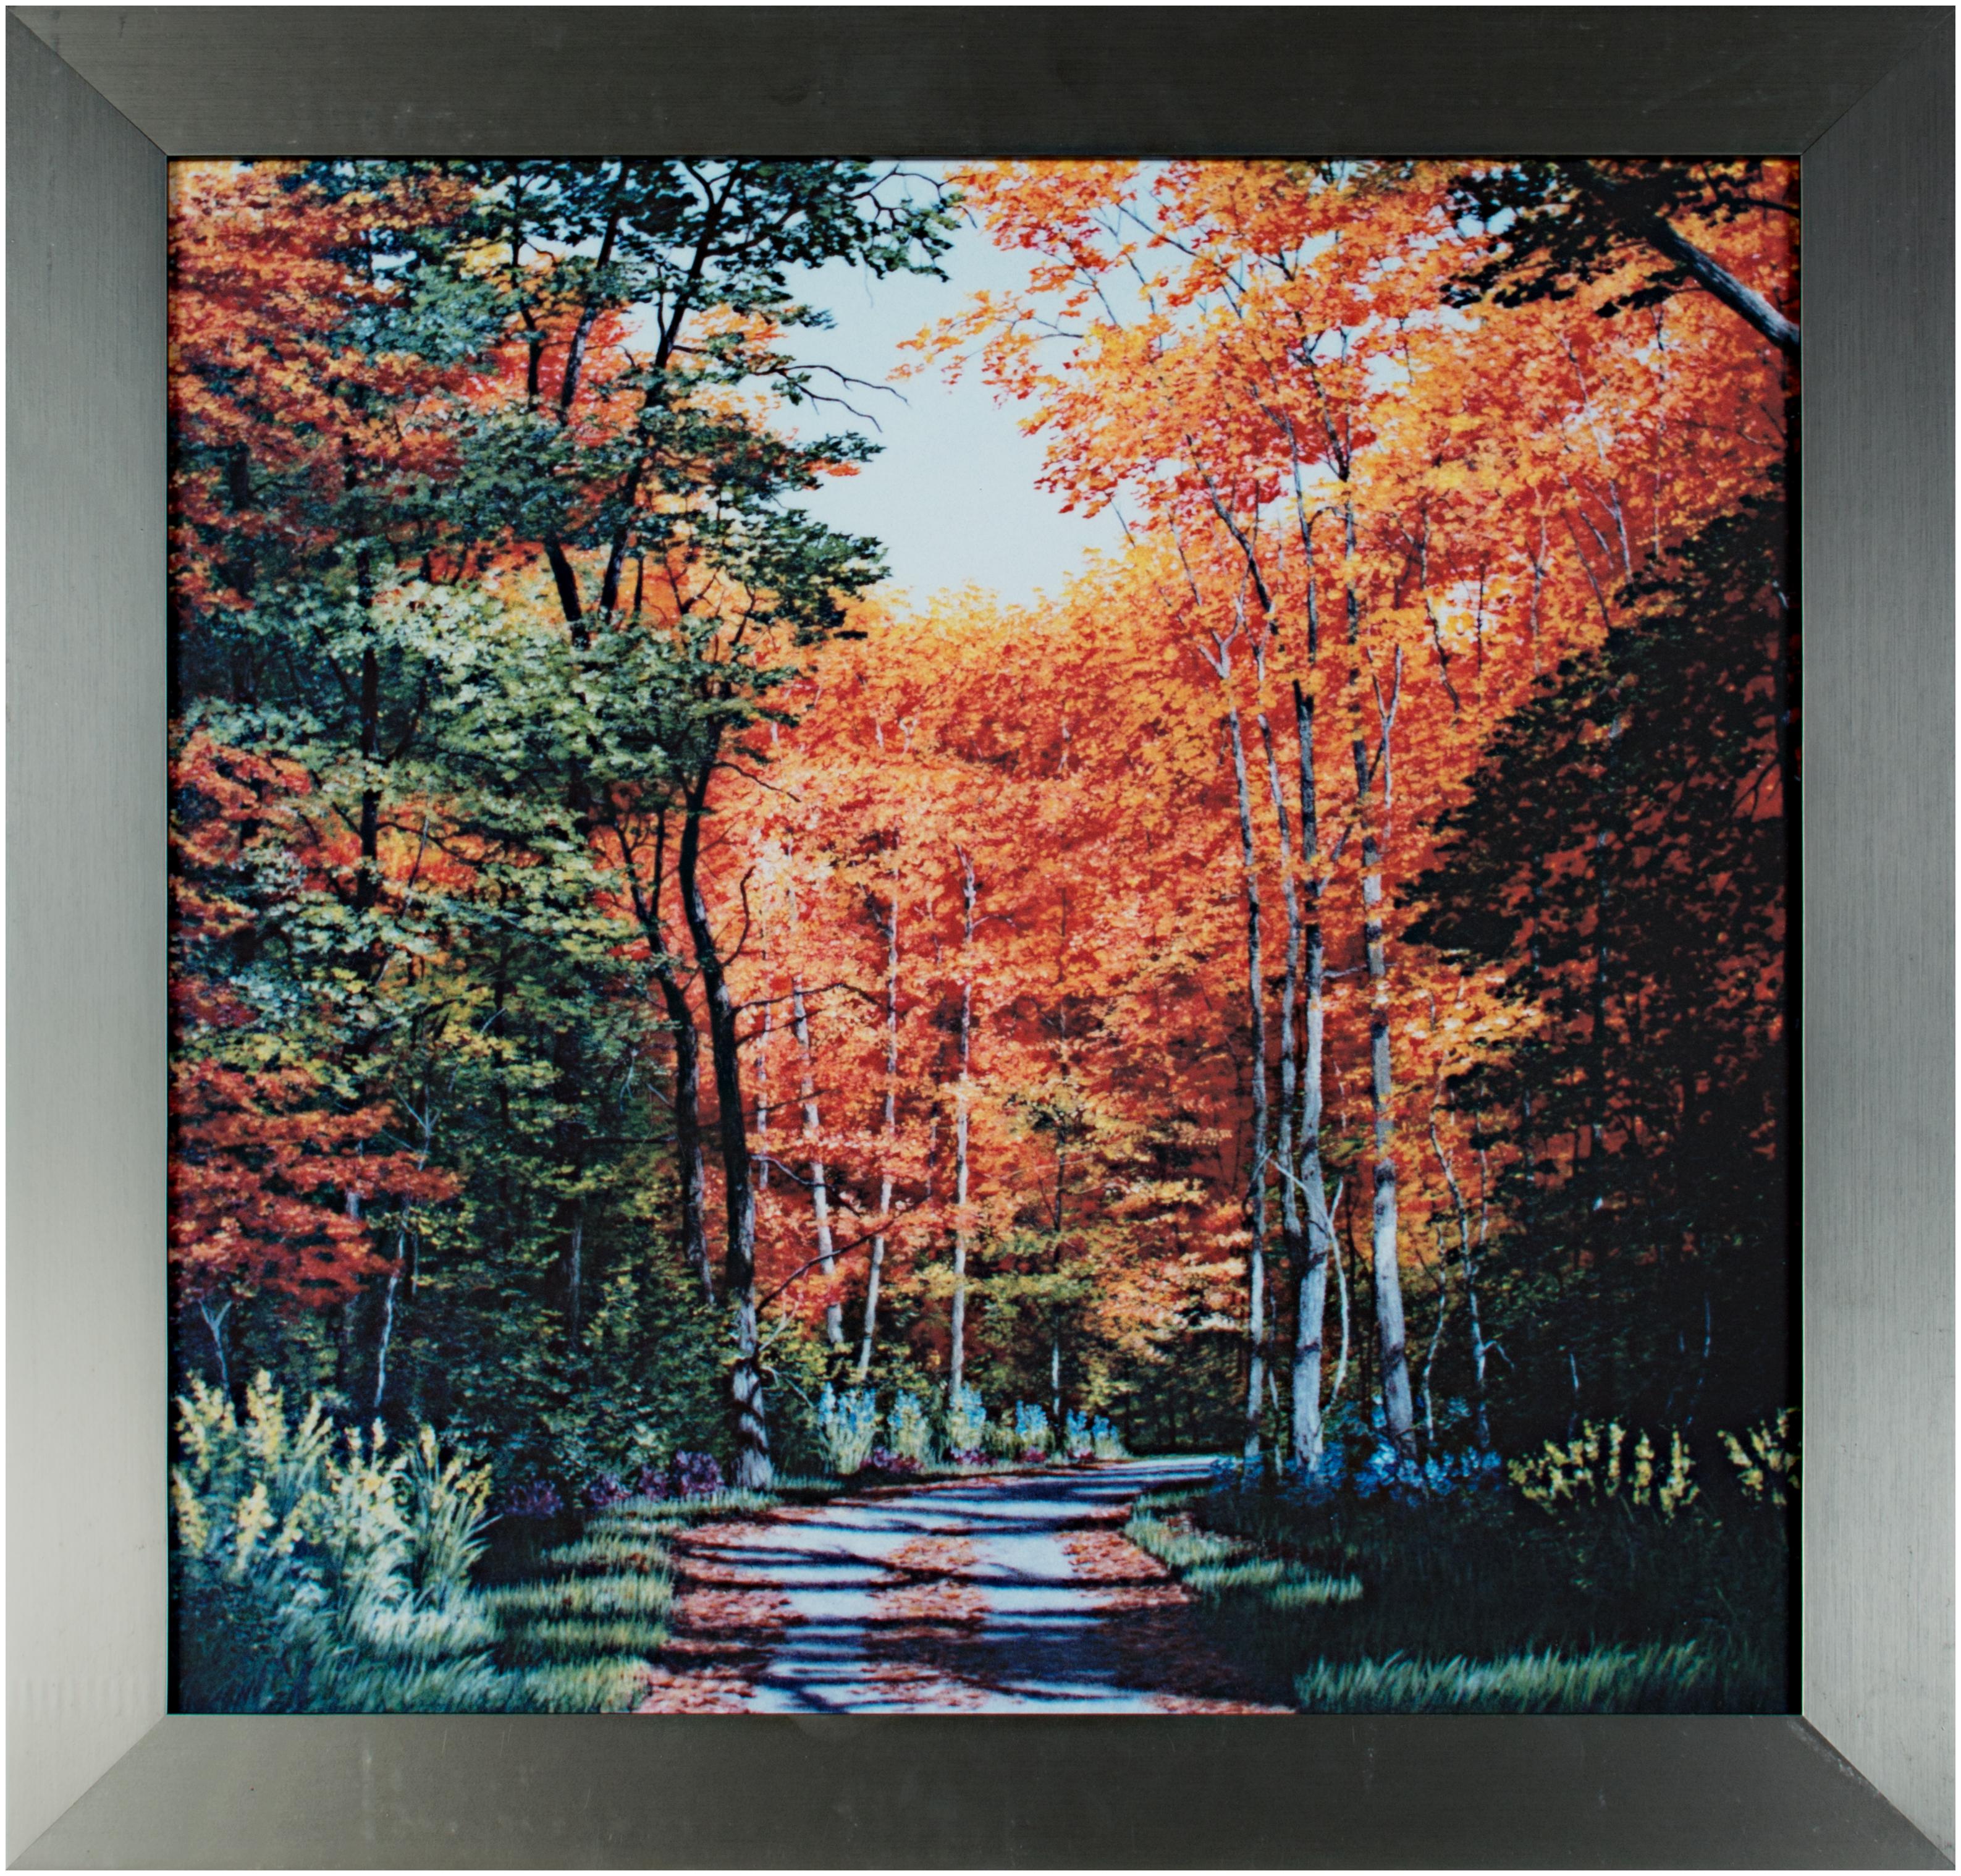 "Autumn in Wisconsin" is a giclée print on board. It is based after the original oil painting by Gregory D. Steele. This fall forest view looks down a small road. The leaves have gathered showing the tire marks. The foliage on the ground is still